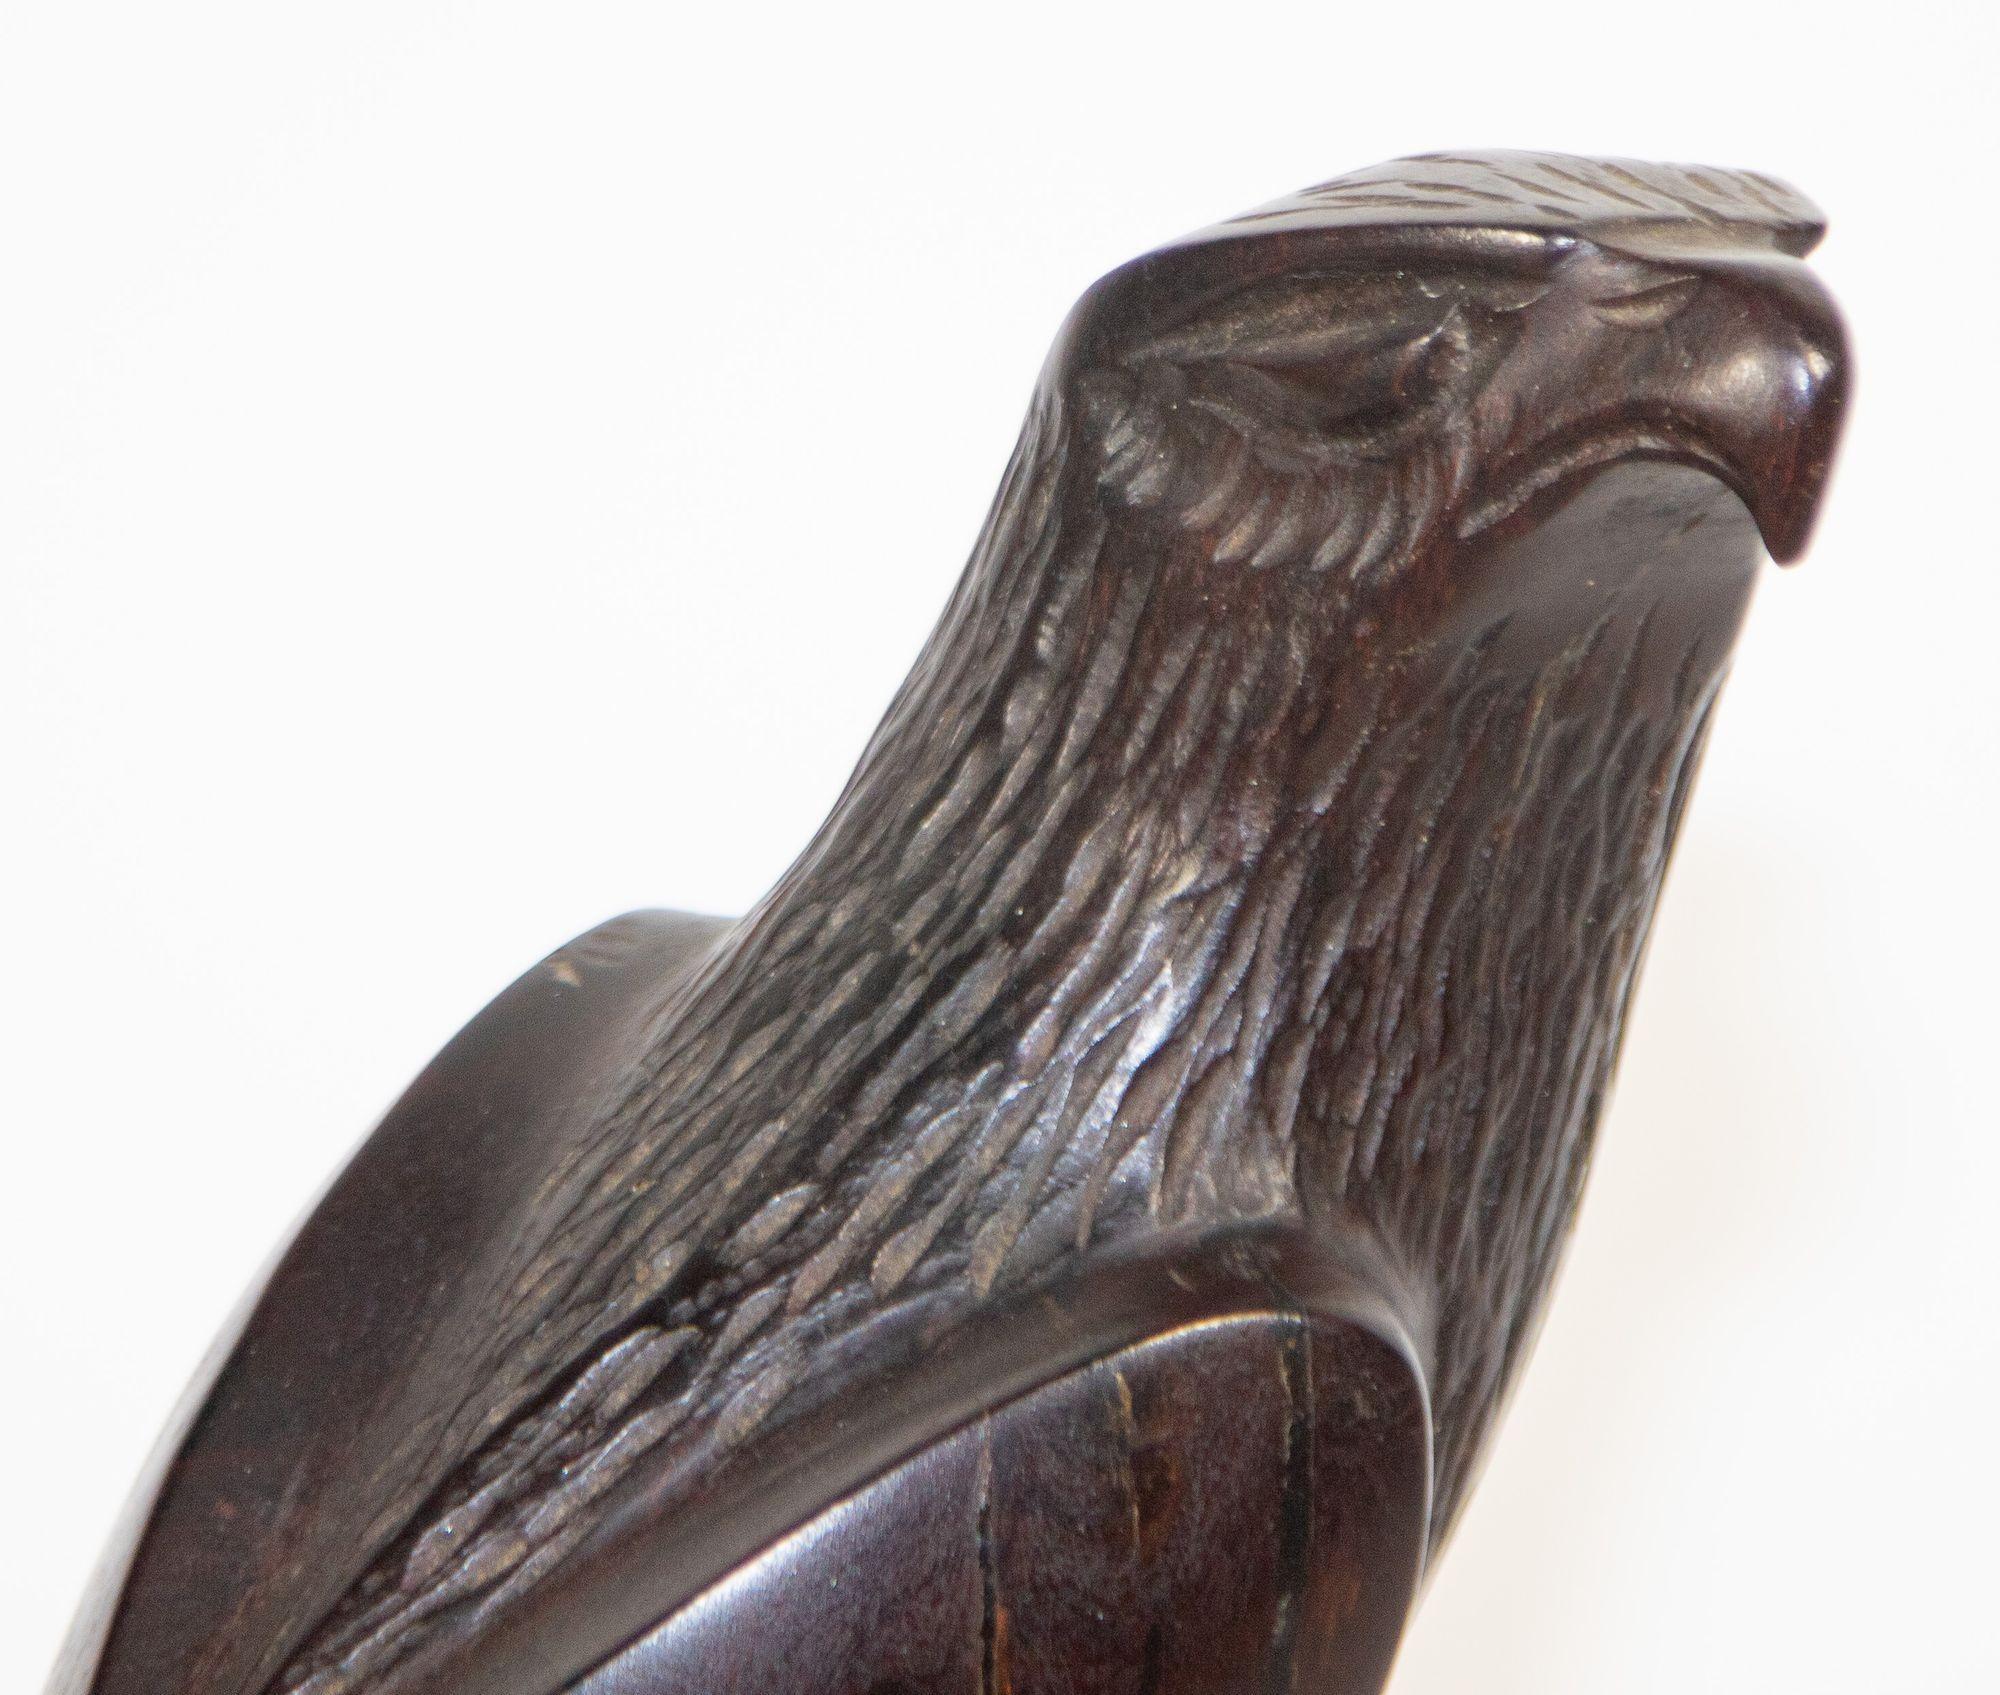 Handmade carved wood Falcon sculpture 1960s.
Vintage Seri Ironwood Animal Hand-Carved Sculpture of a American Eagle or Falcon.
Vintage Hand carved walnut wooden beautiful design decorative bird falcon sculpture.
Carved wood figure of an Eagle